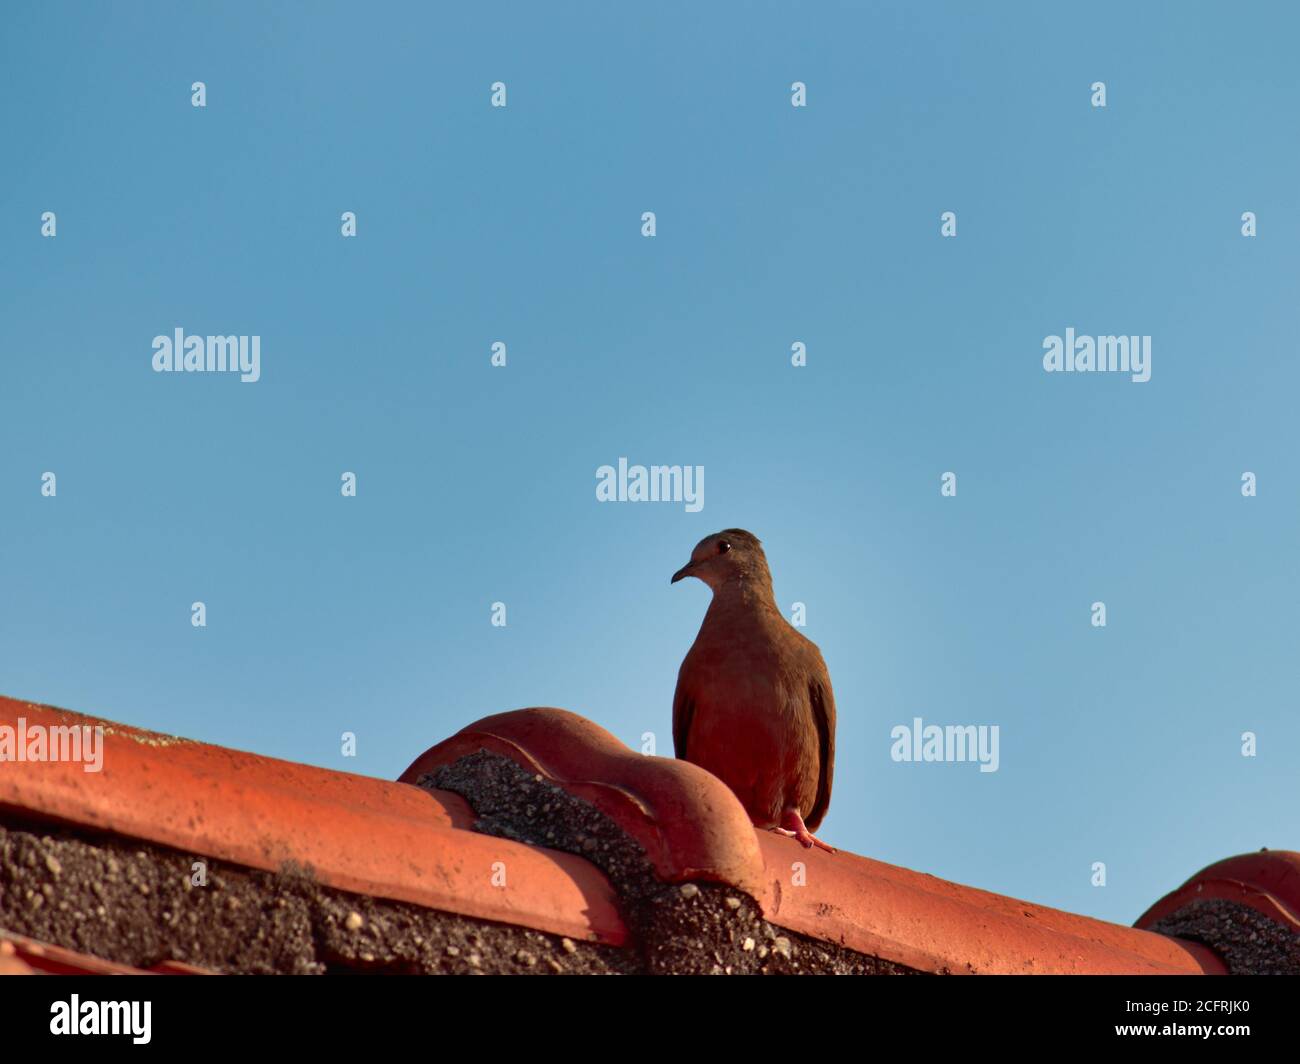 small brown dove, known as Common Ground-Dove, standing on top of a roof with red tiles, under a bright blue sky, Stock Photo